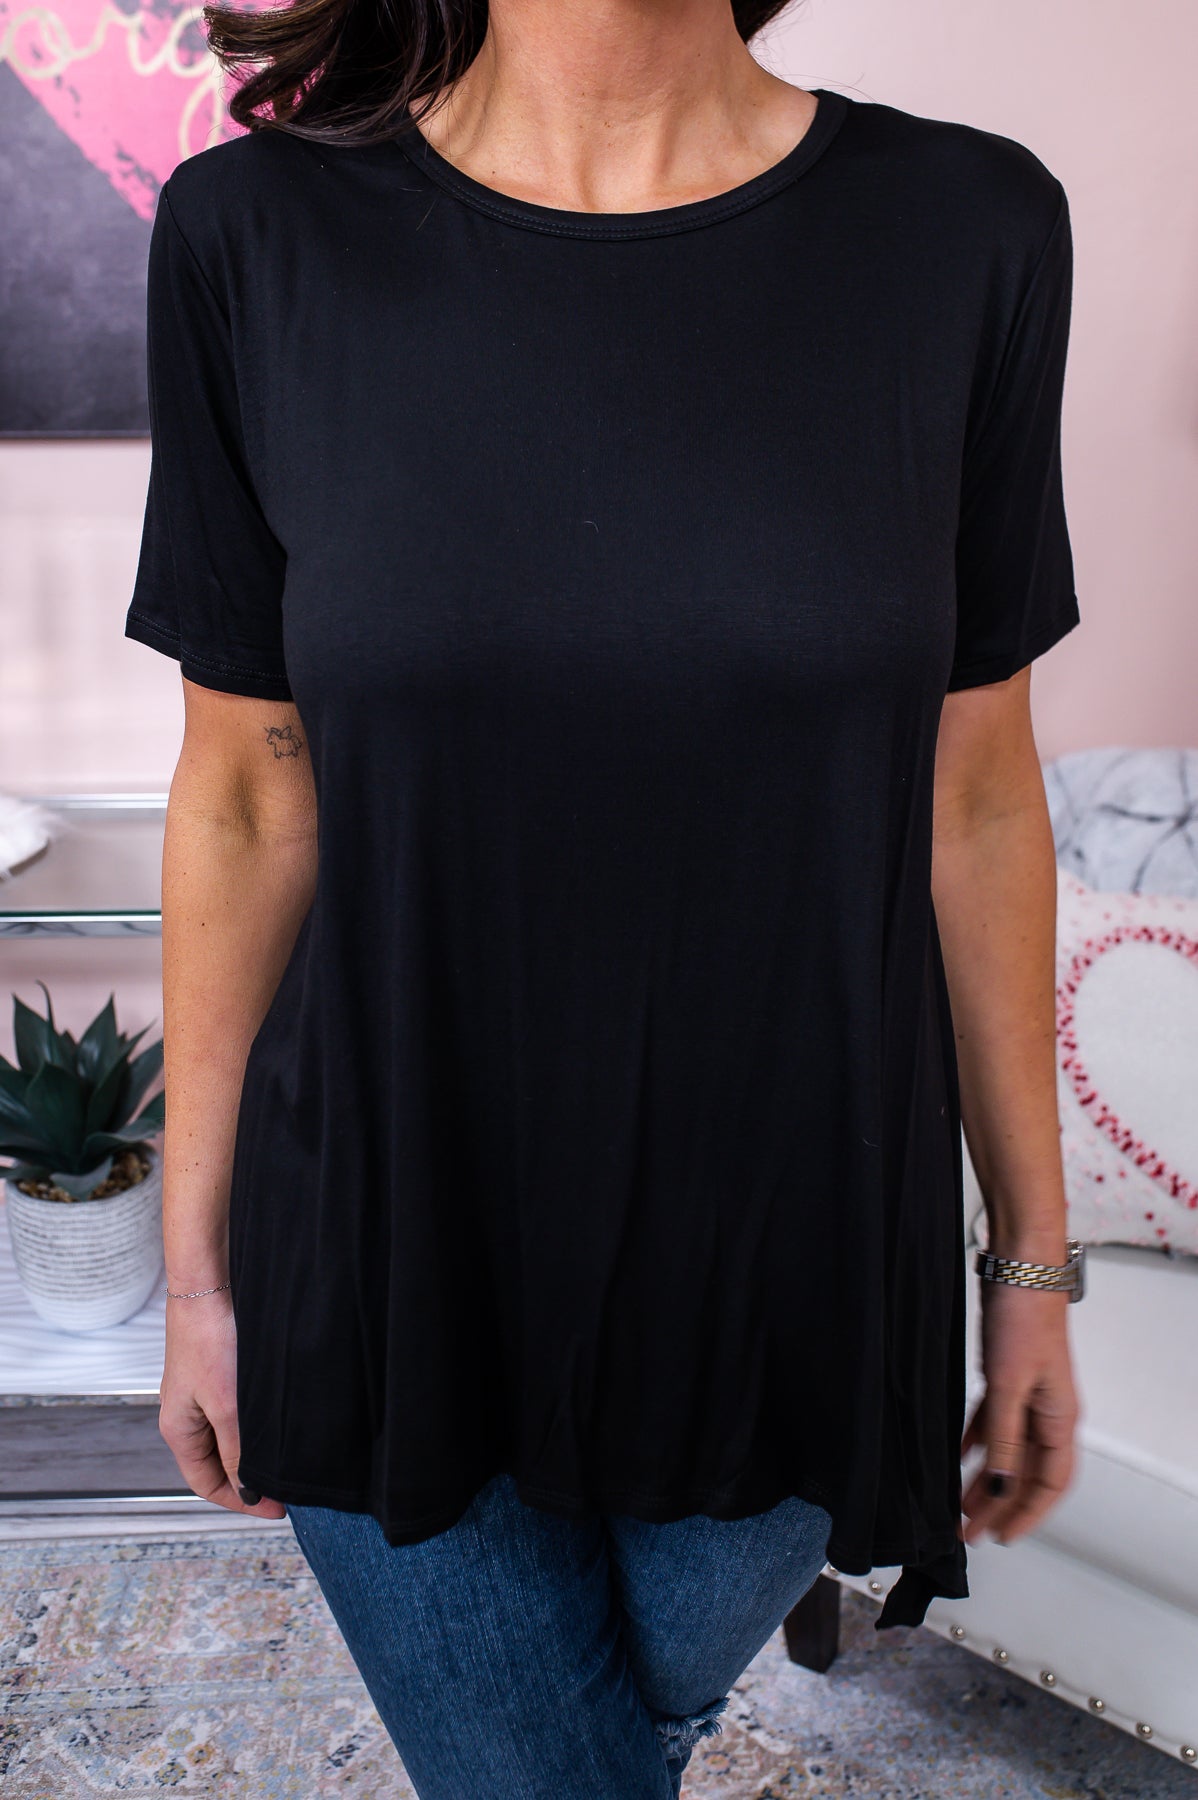 A Little Preoccupied Black Solid Asymmetrical Top - T6364BK